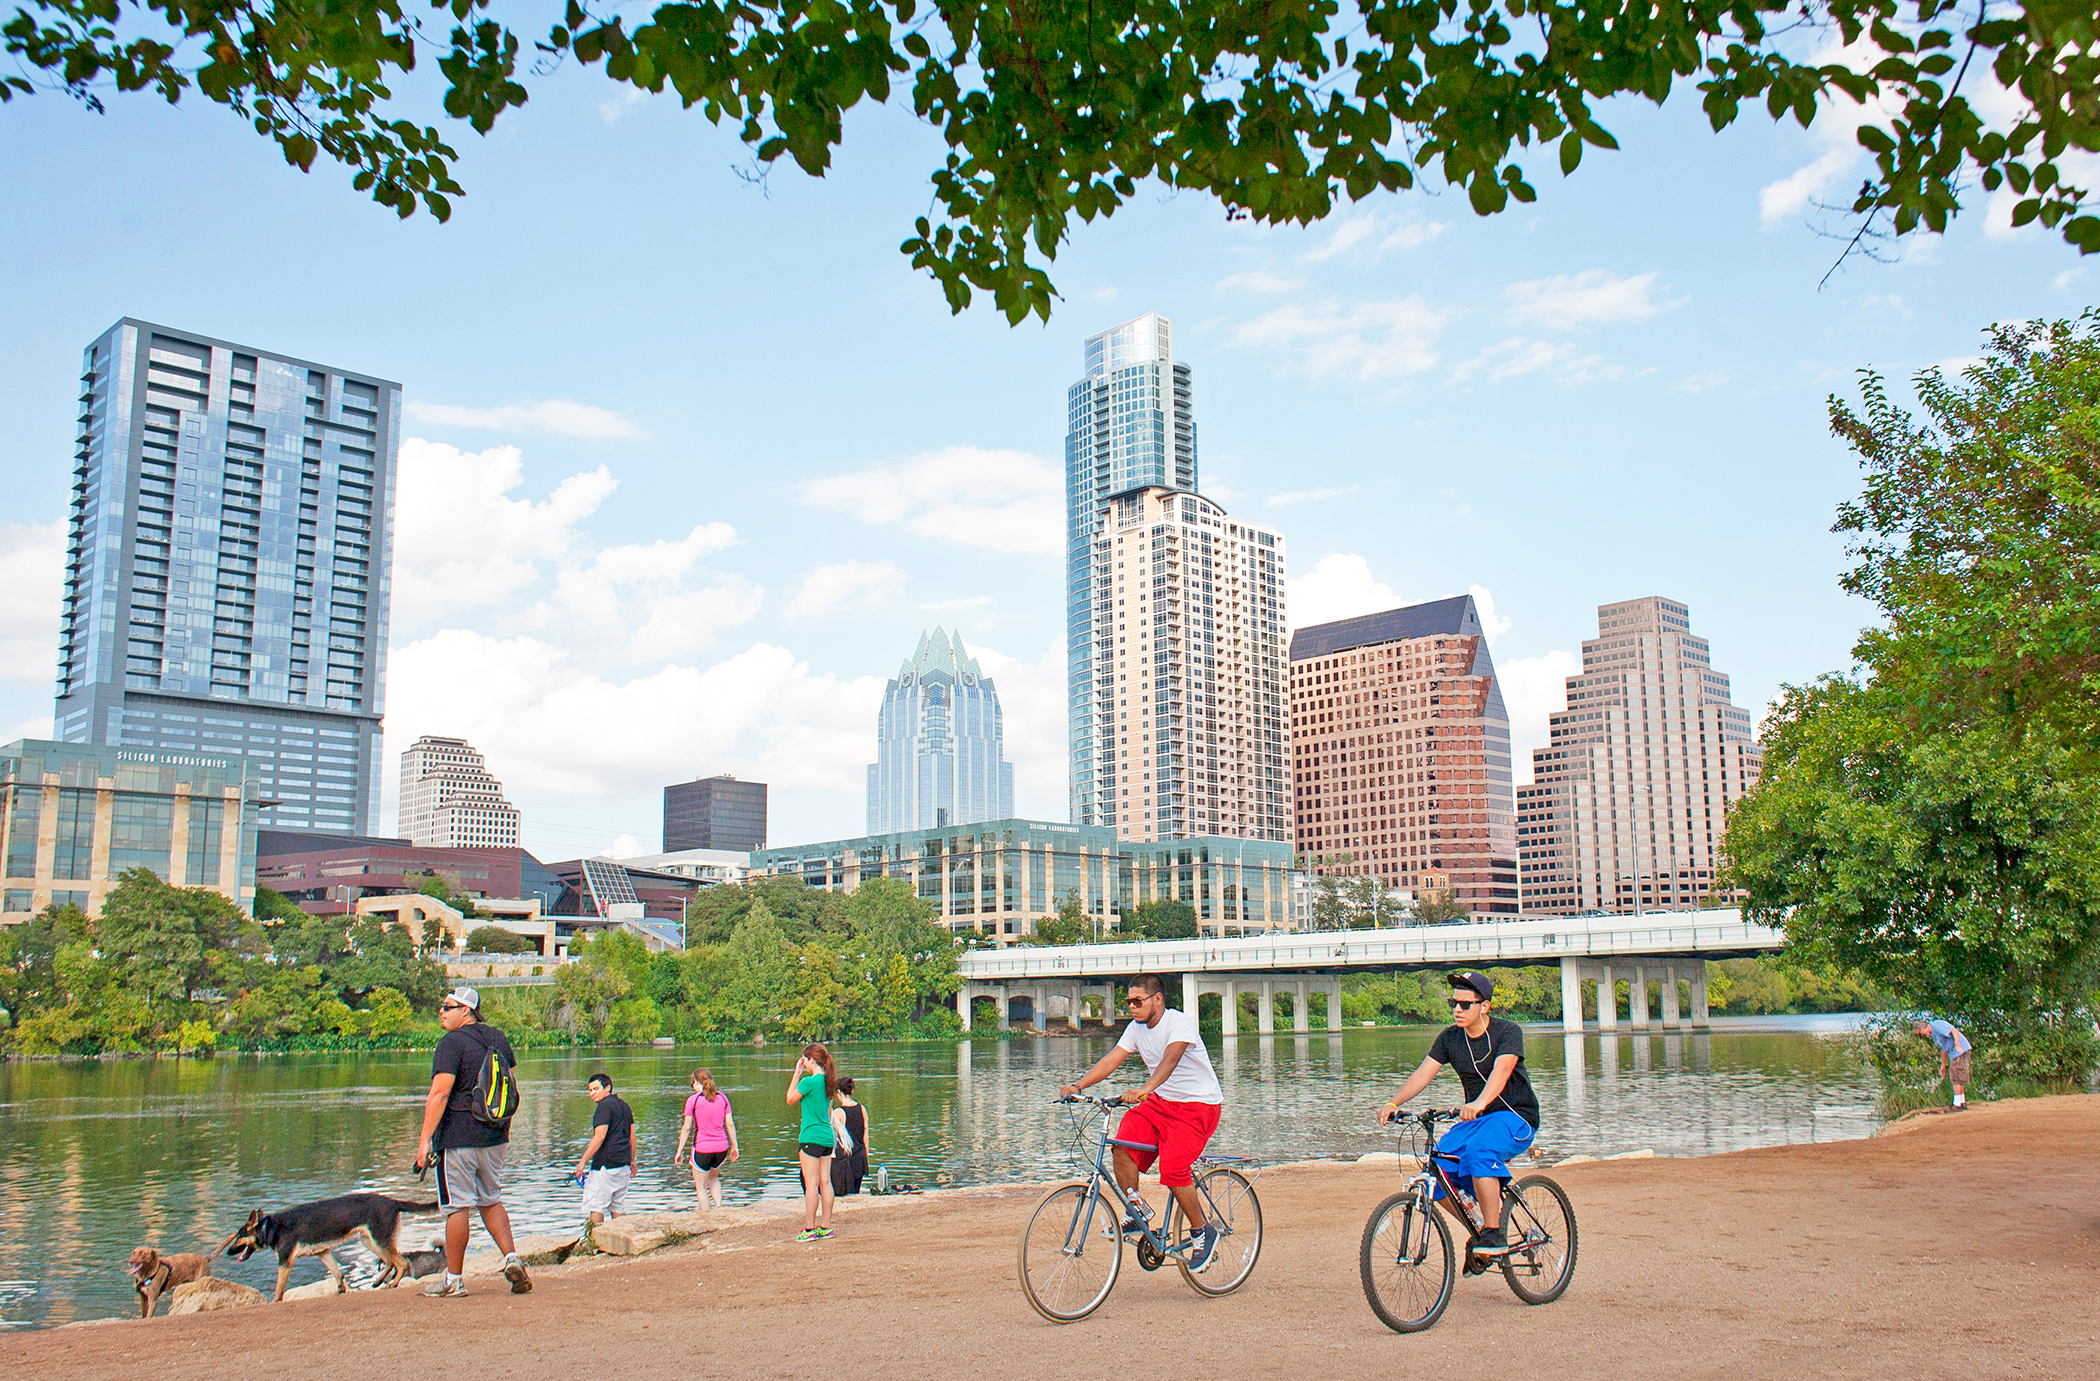 The view of the skyline from across Lady Bird Lake